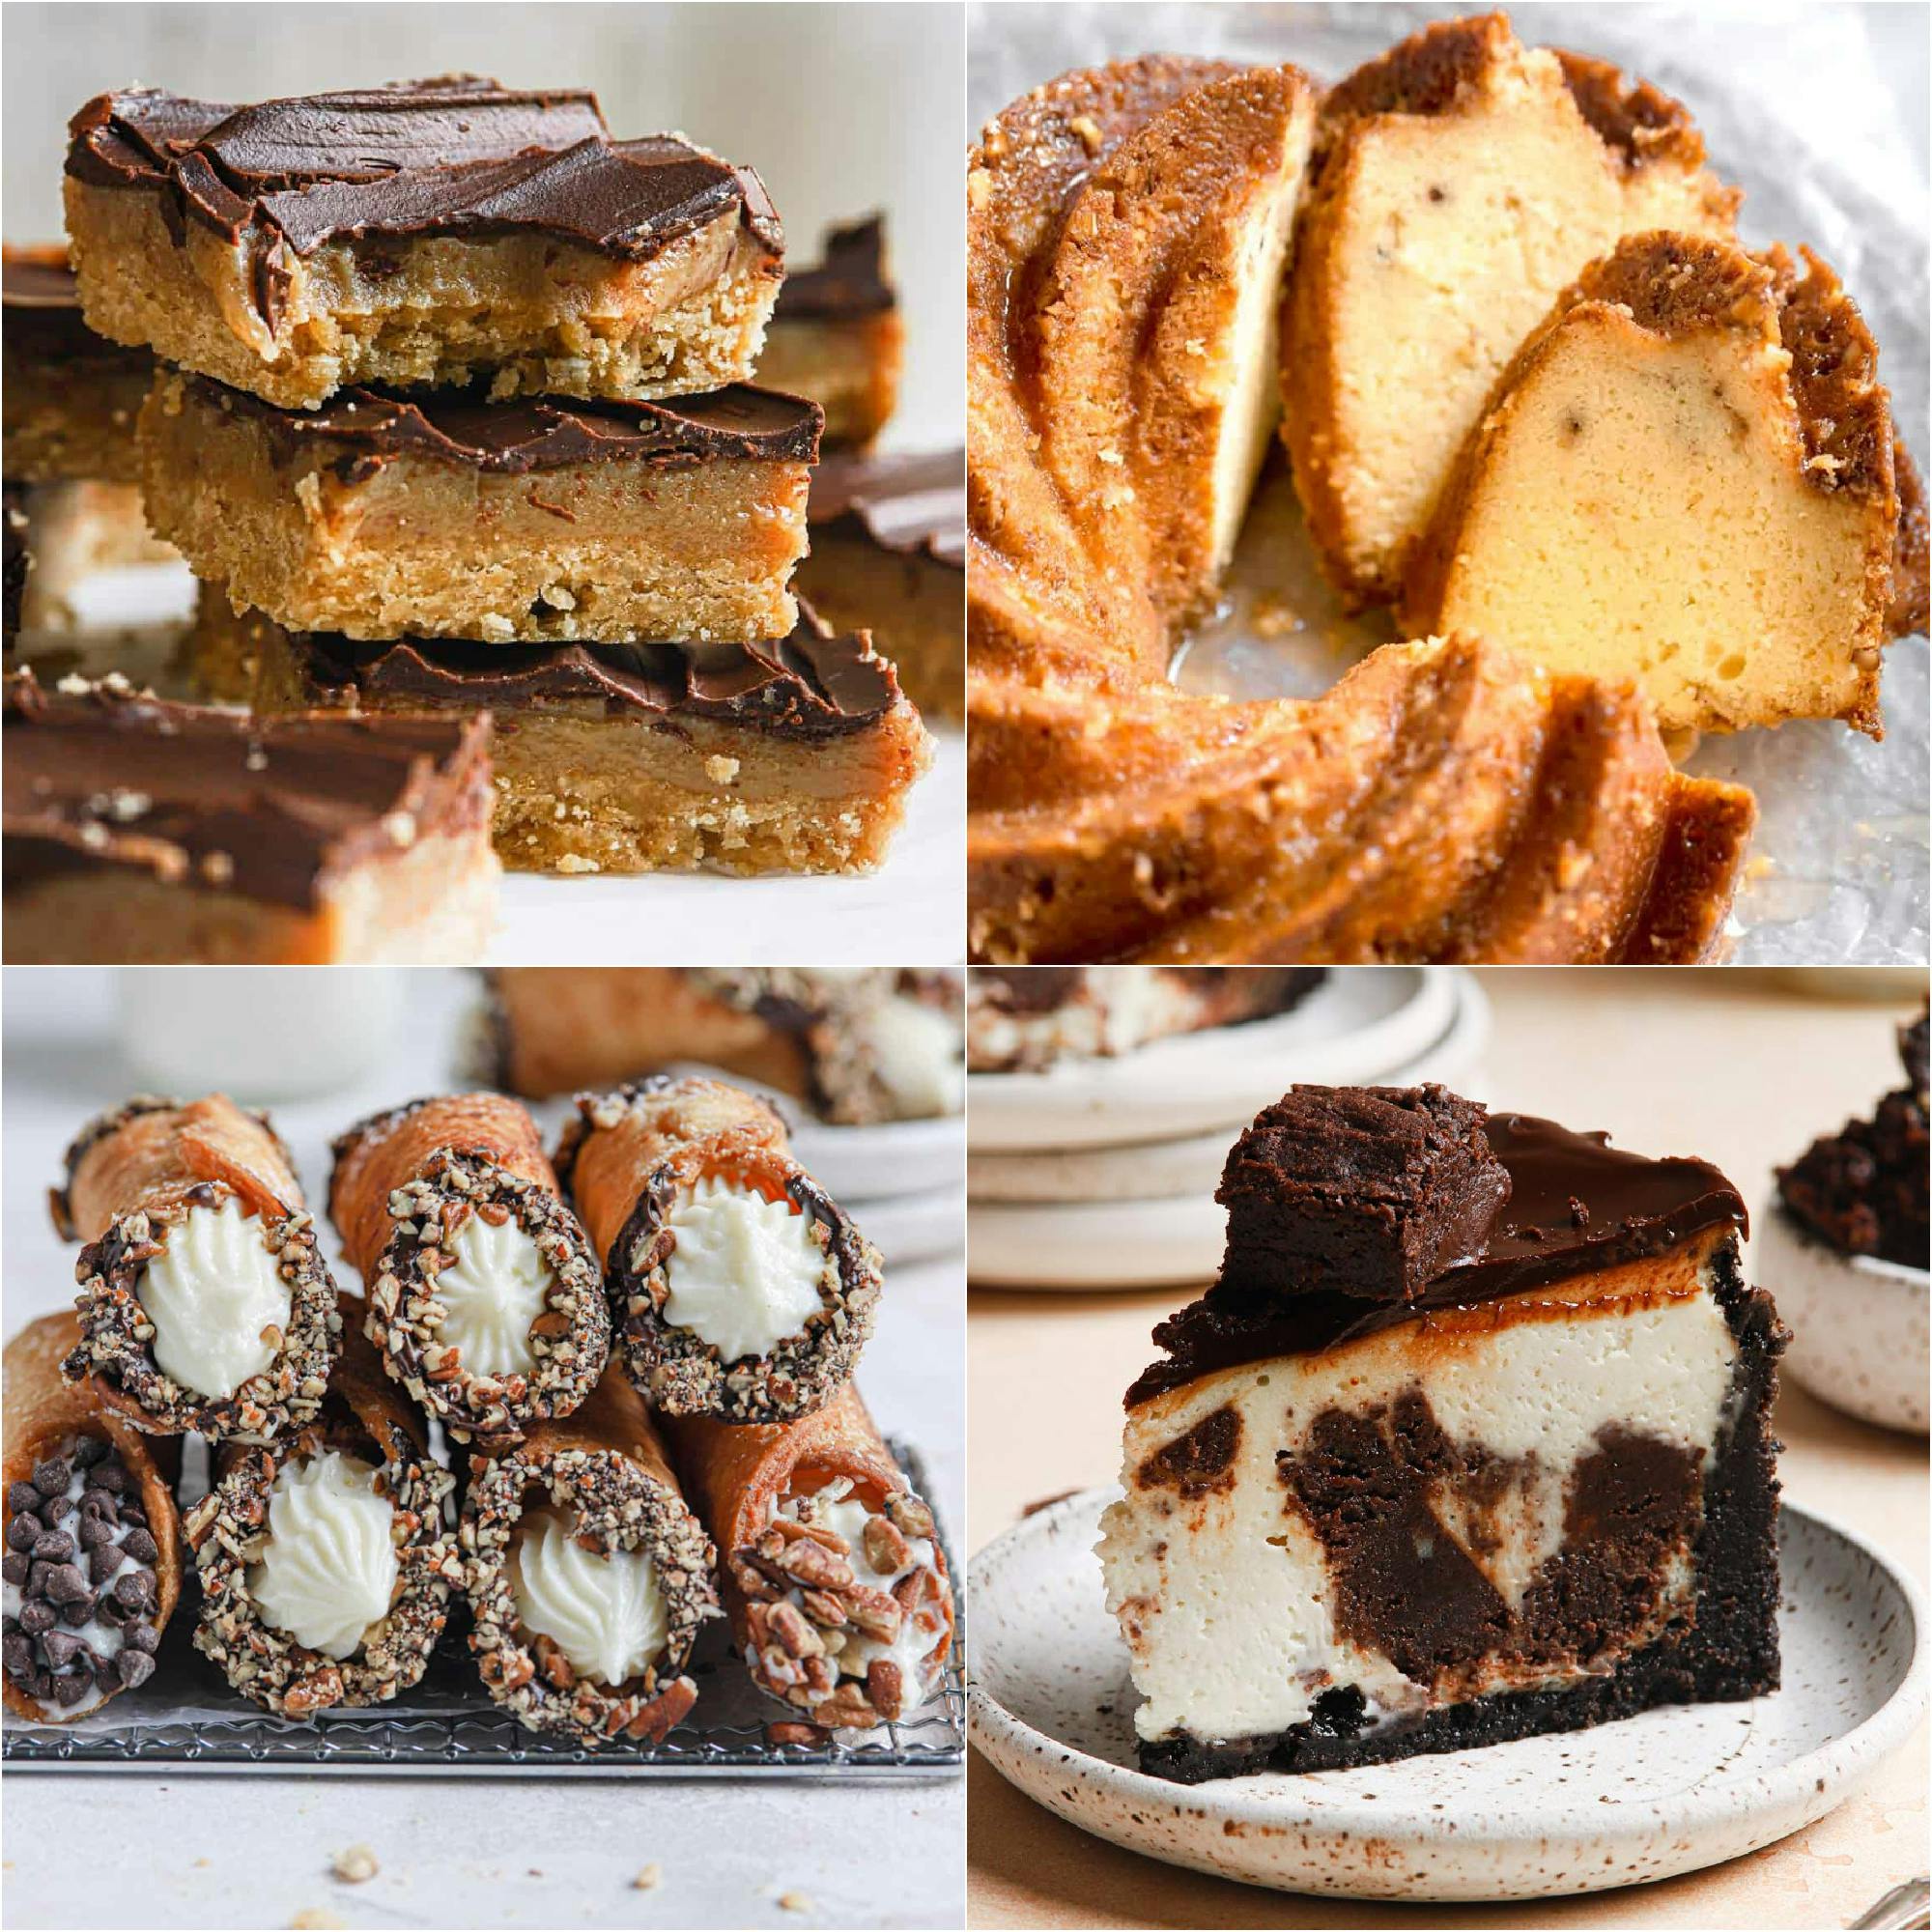 a collage of 4 images of a variety of desserts